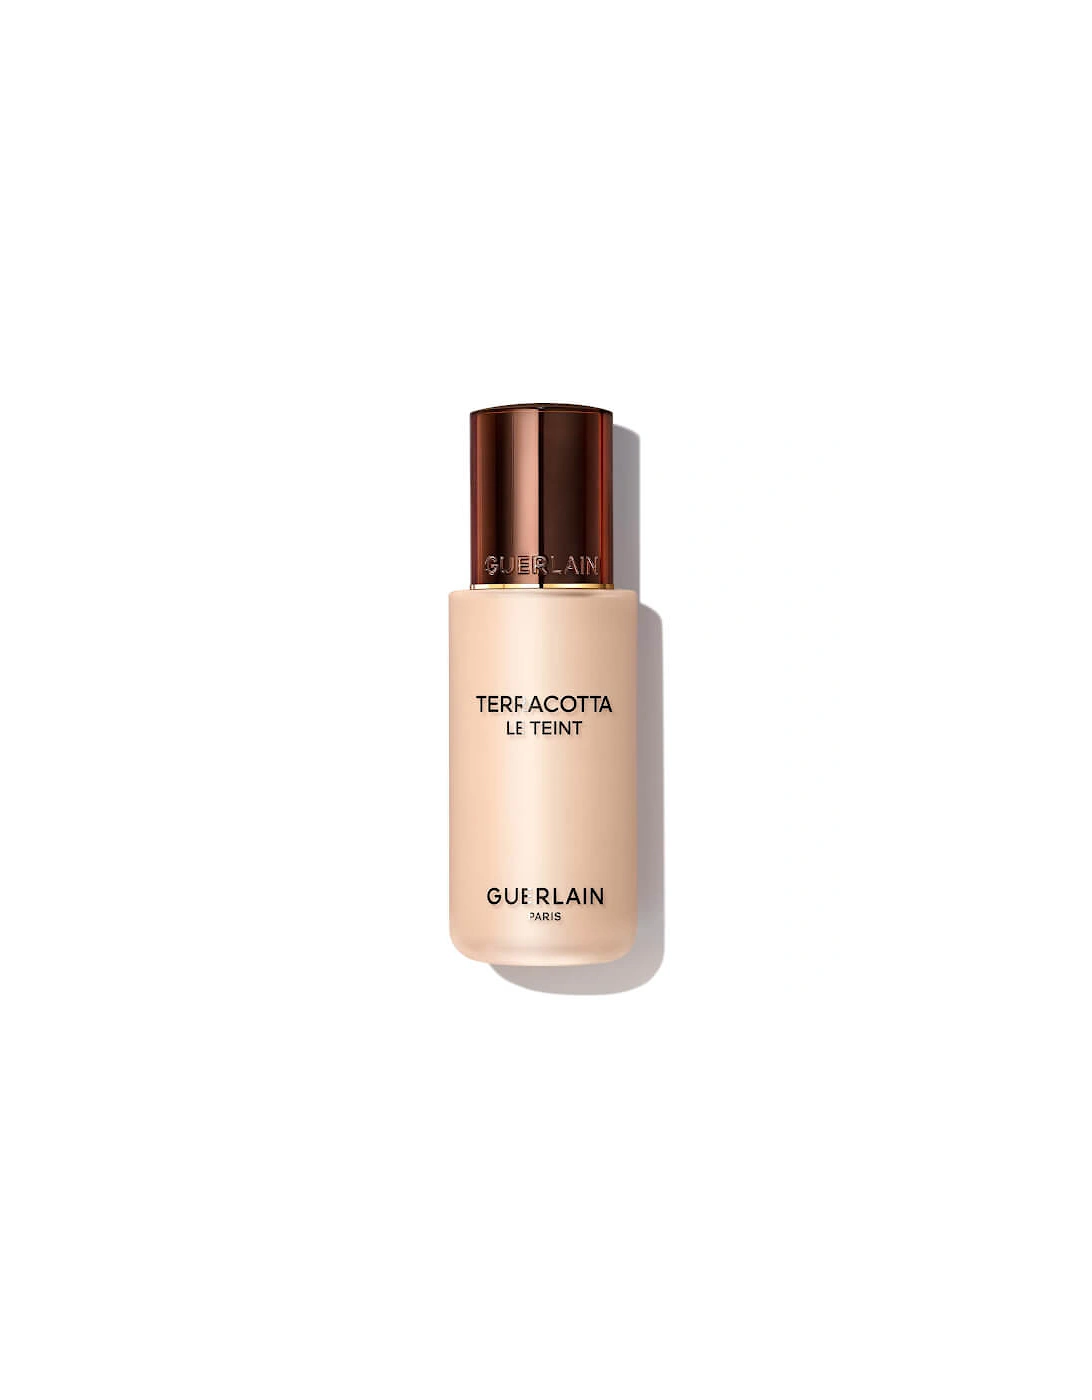 Terracotta Le Teint Healthy Glow Natural Perfection Foundation - 0C, 2 of 1